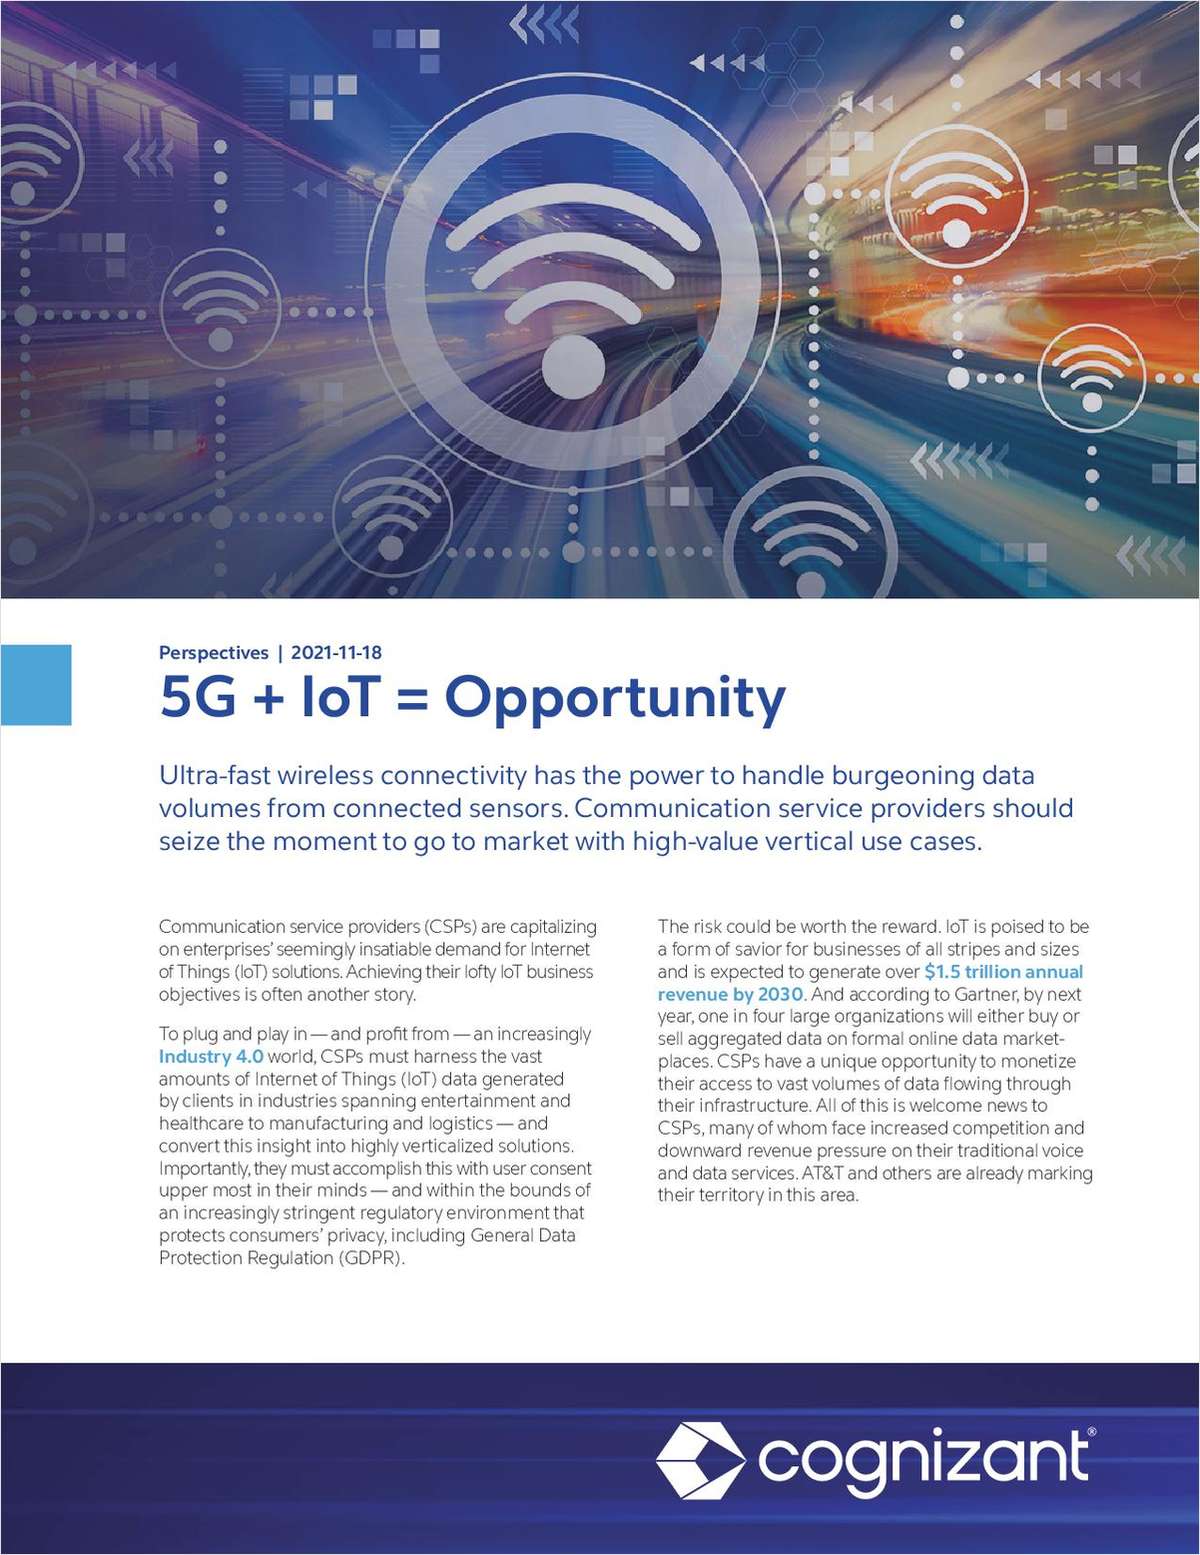 5G + IoT = Opportunity